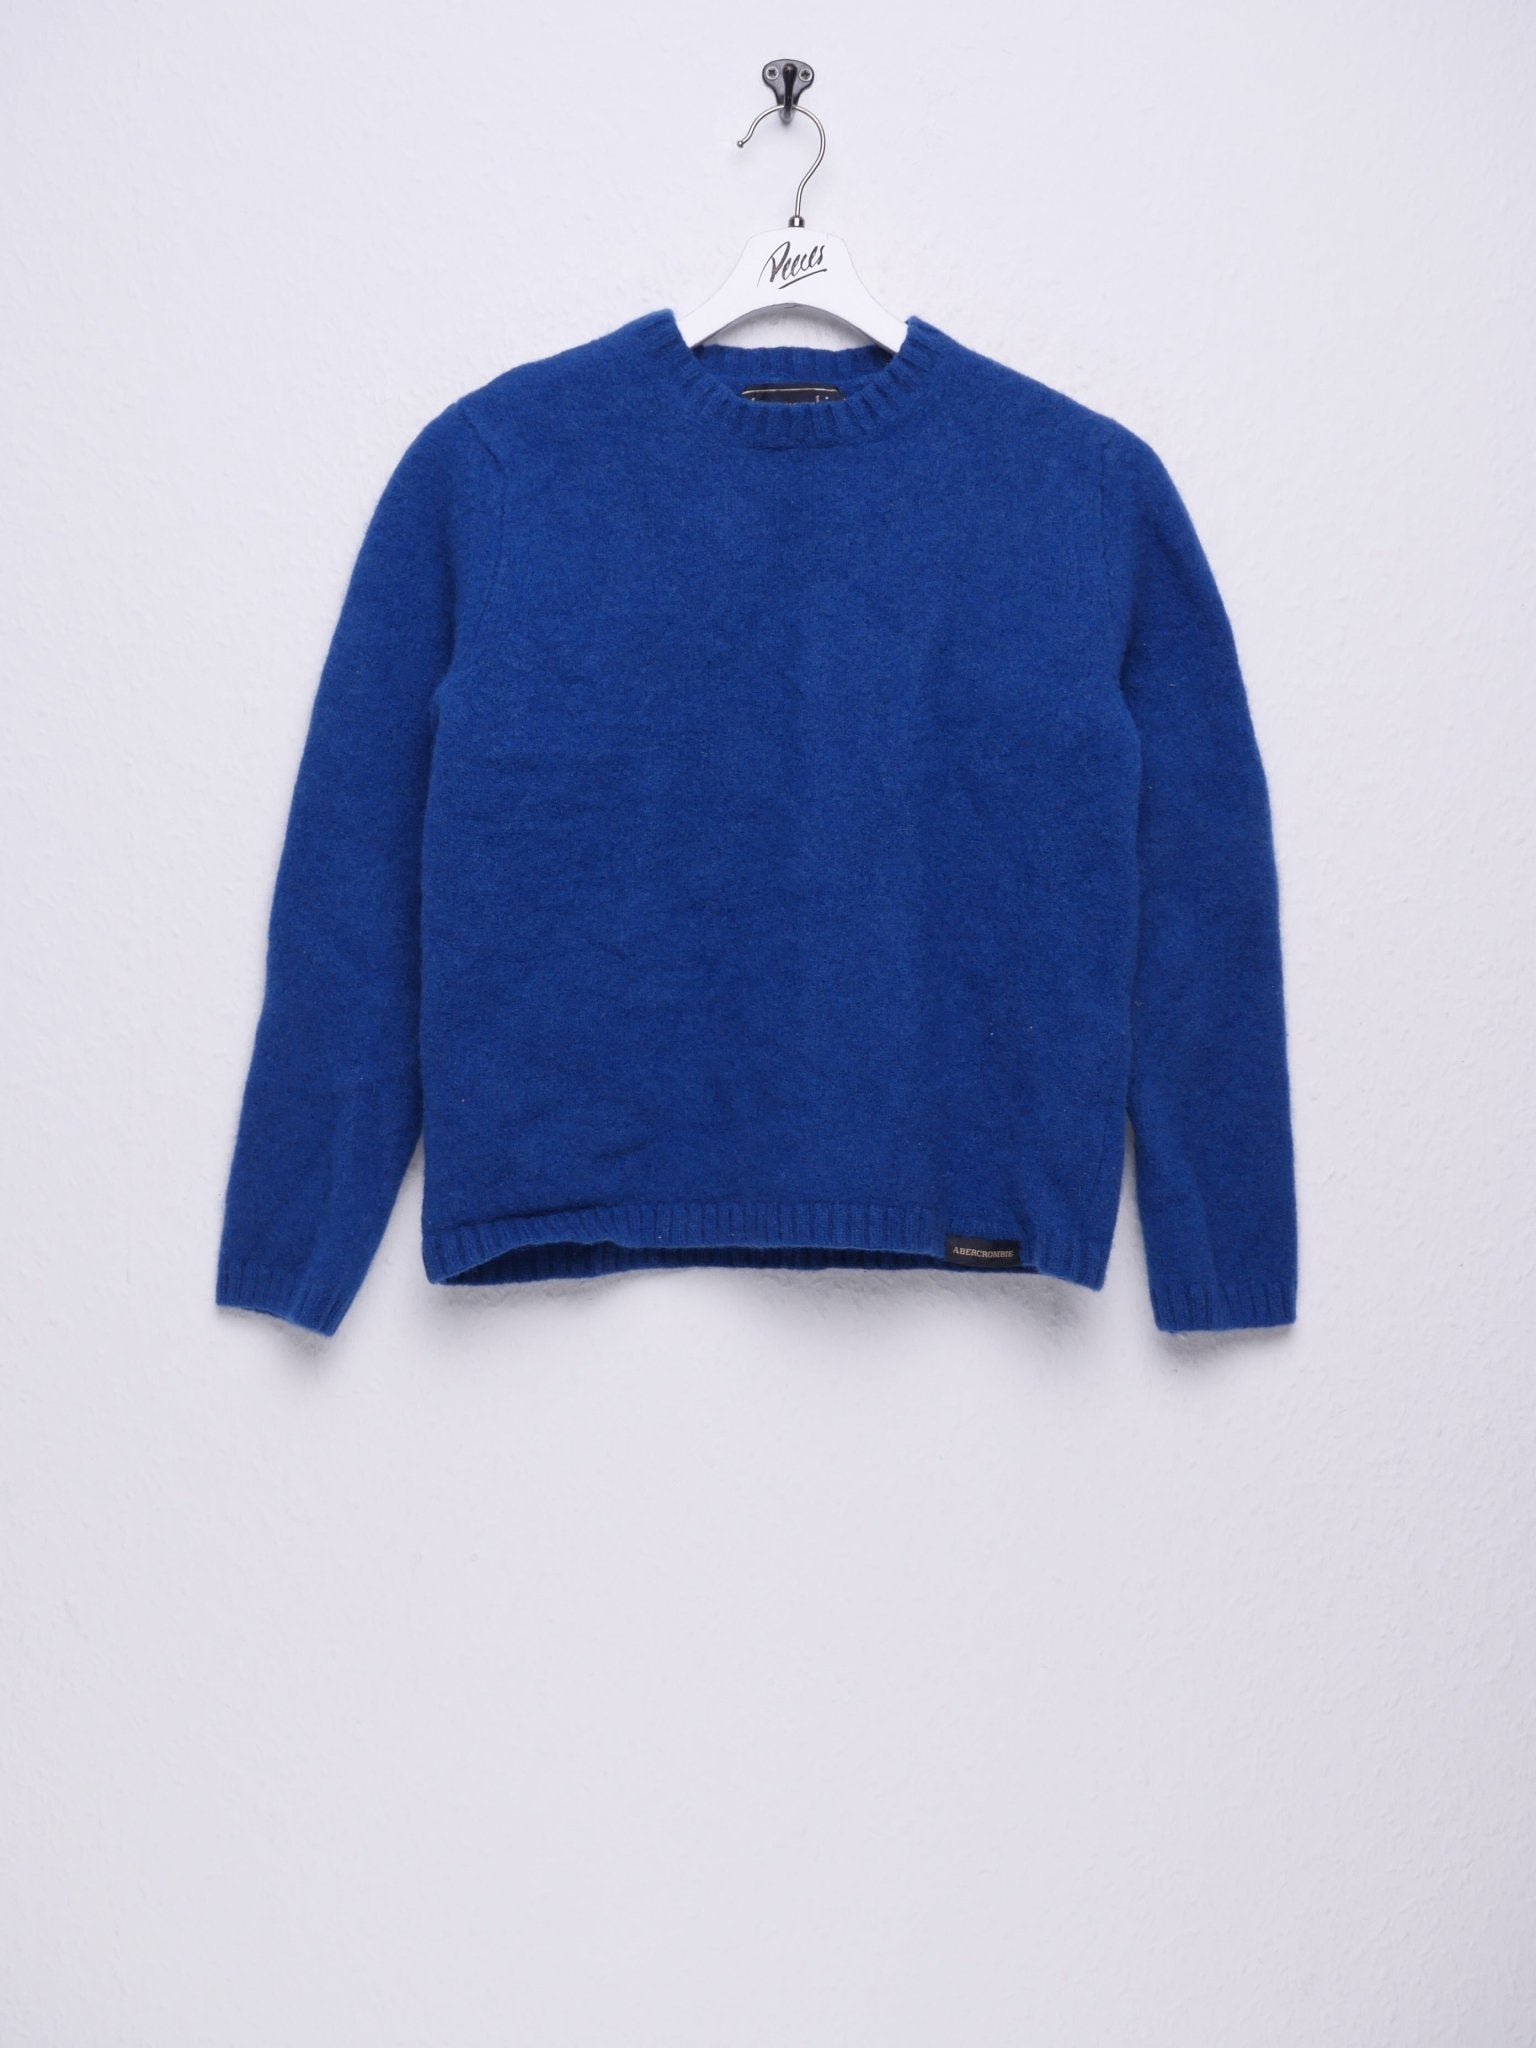 Abercrombie&Fitch patched Logo blue Wool Sweater - Peeces